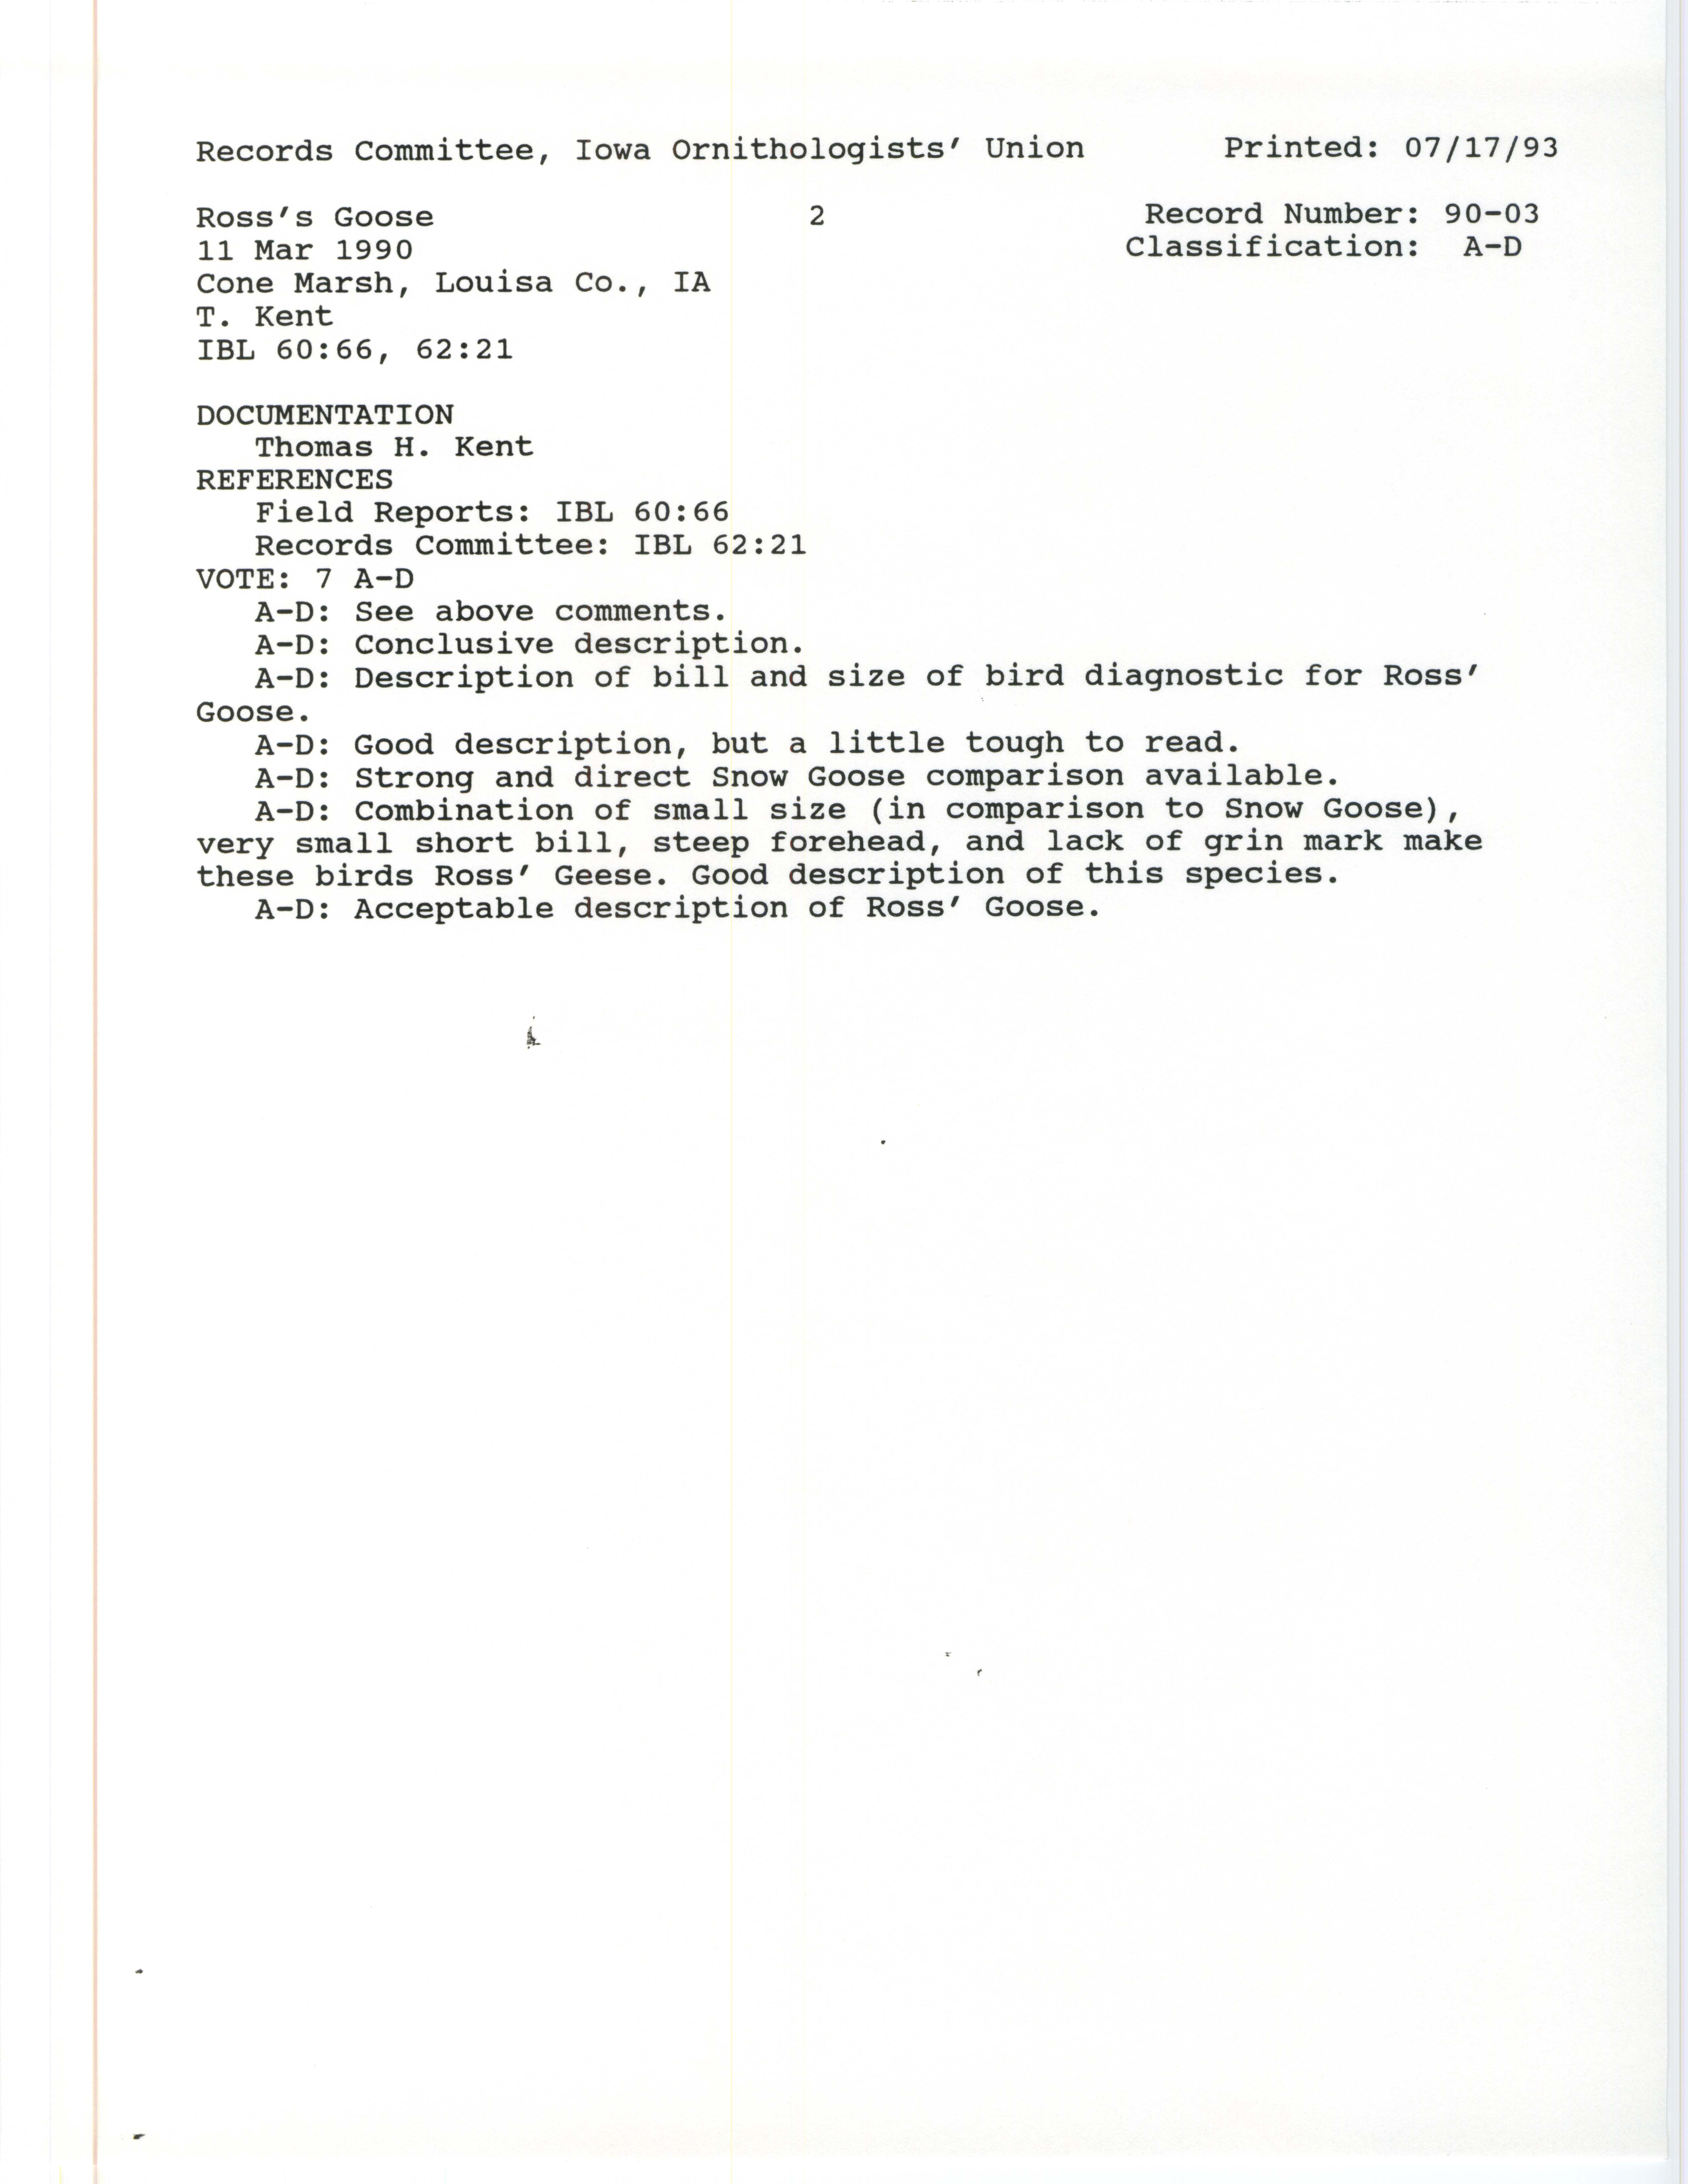 Records Committee review for rare bird sighting of Ross' Goose at Cone Marsh, 1990